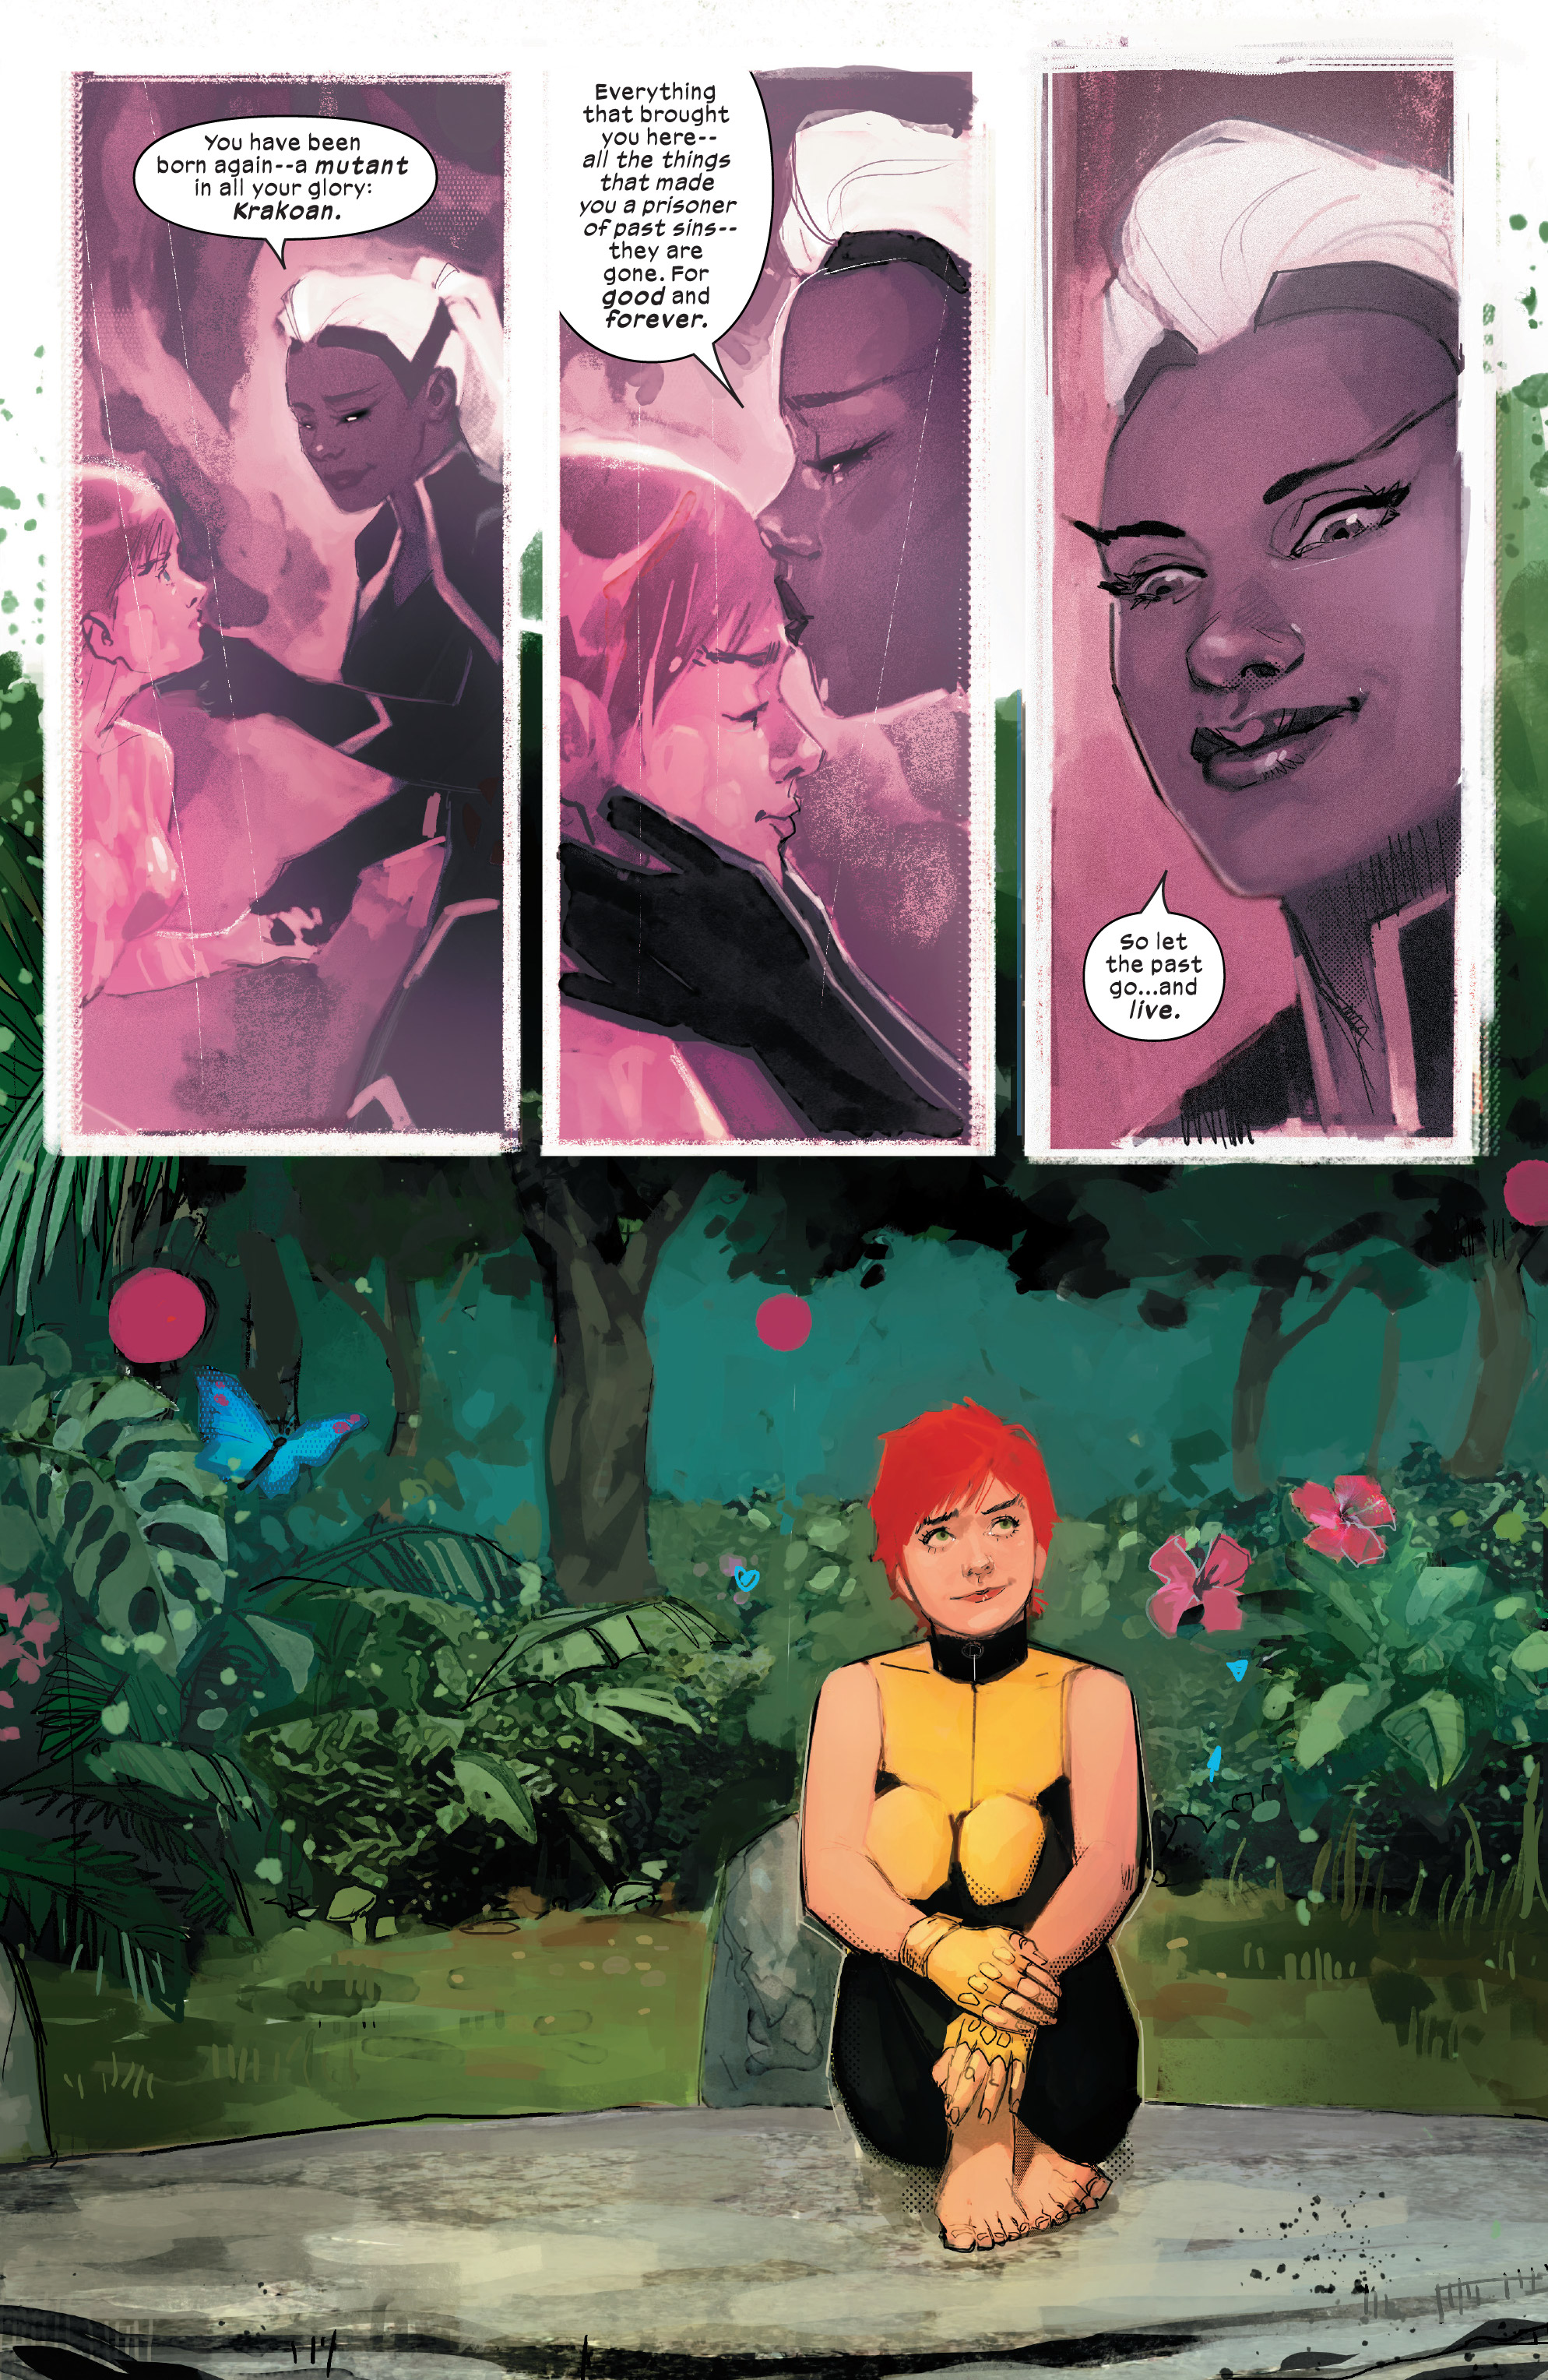 New Mutants (2019-): Chapter 1 - Page 3